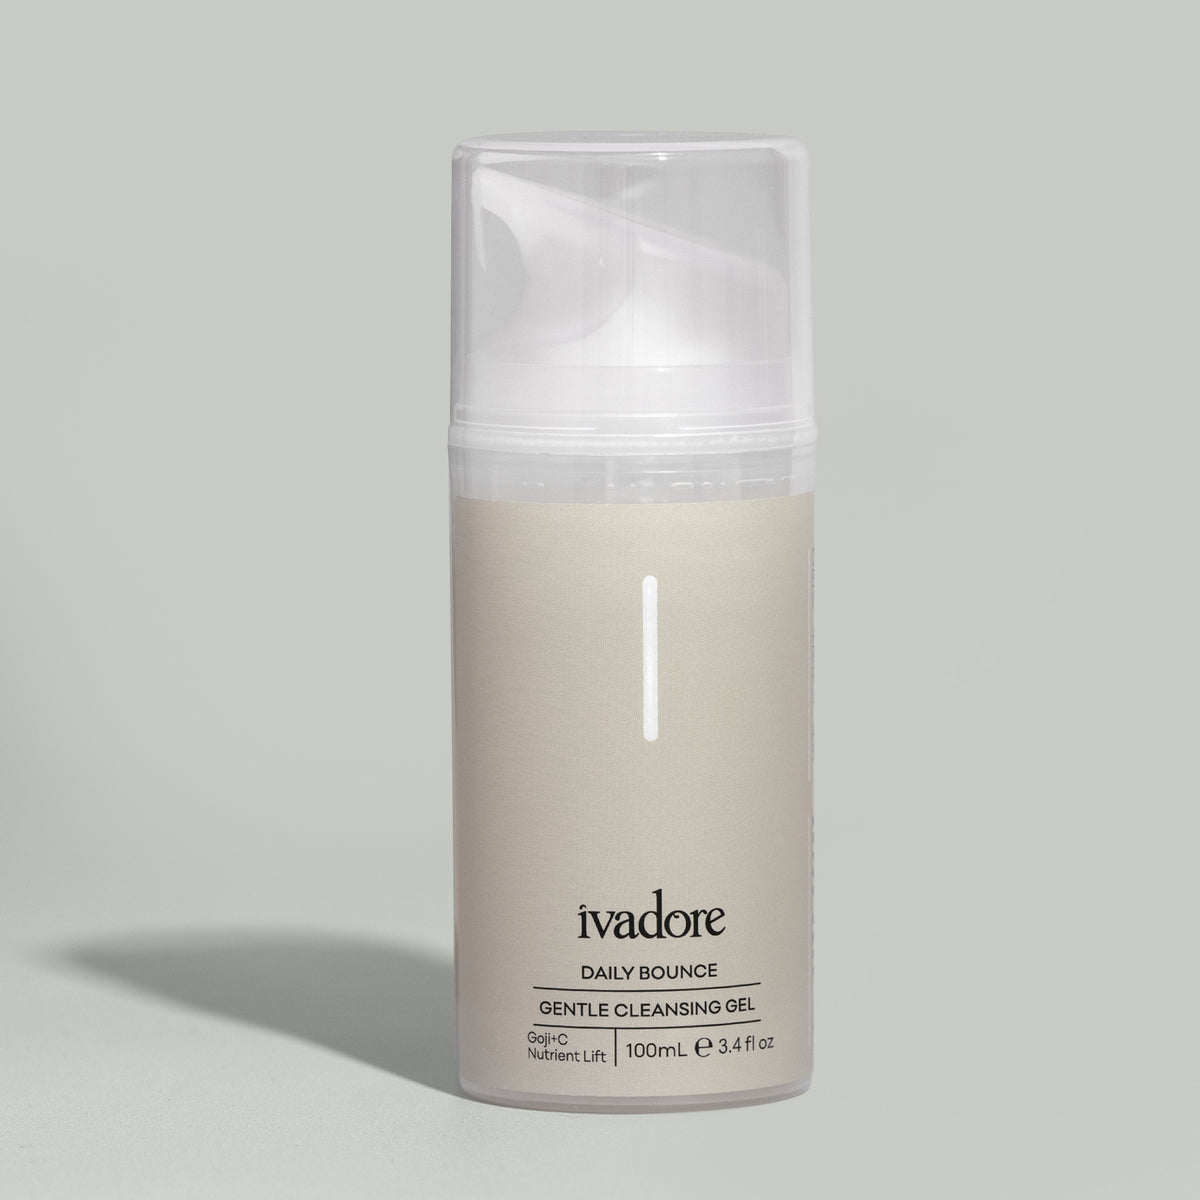 Daily Bounce Cleansing Gel Bottle on grey background with shadow